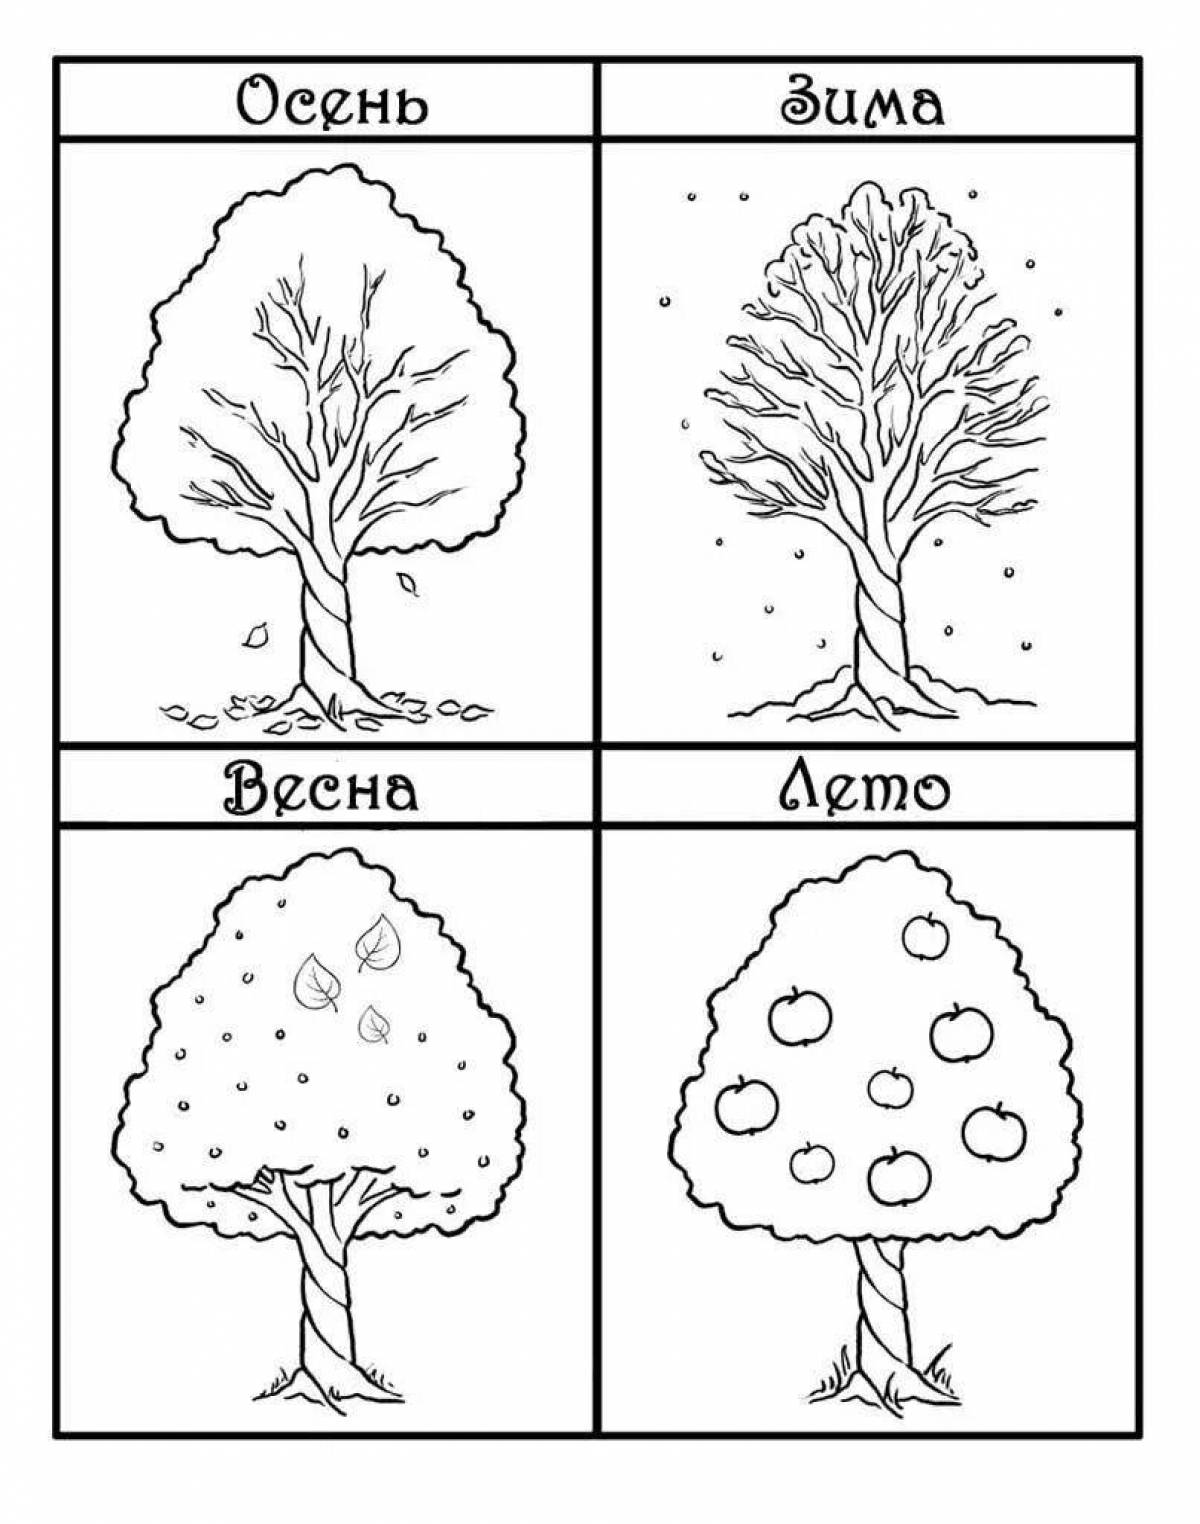 Awesome tree coloring pages for 4-5 year olds